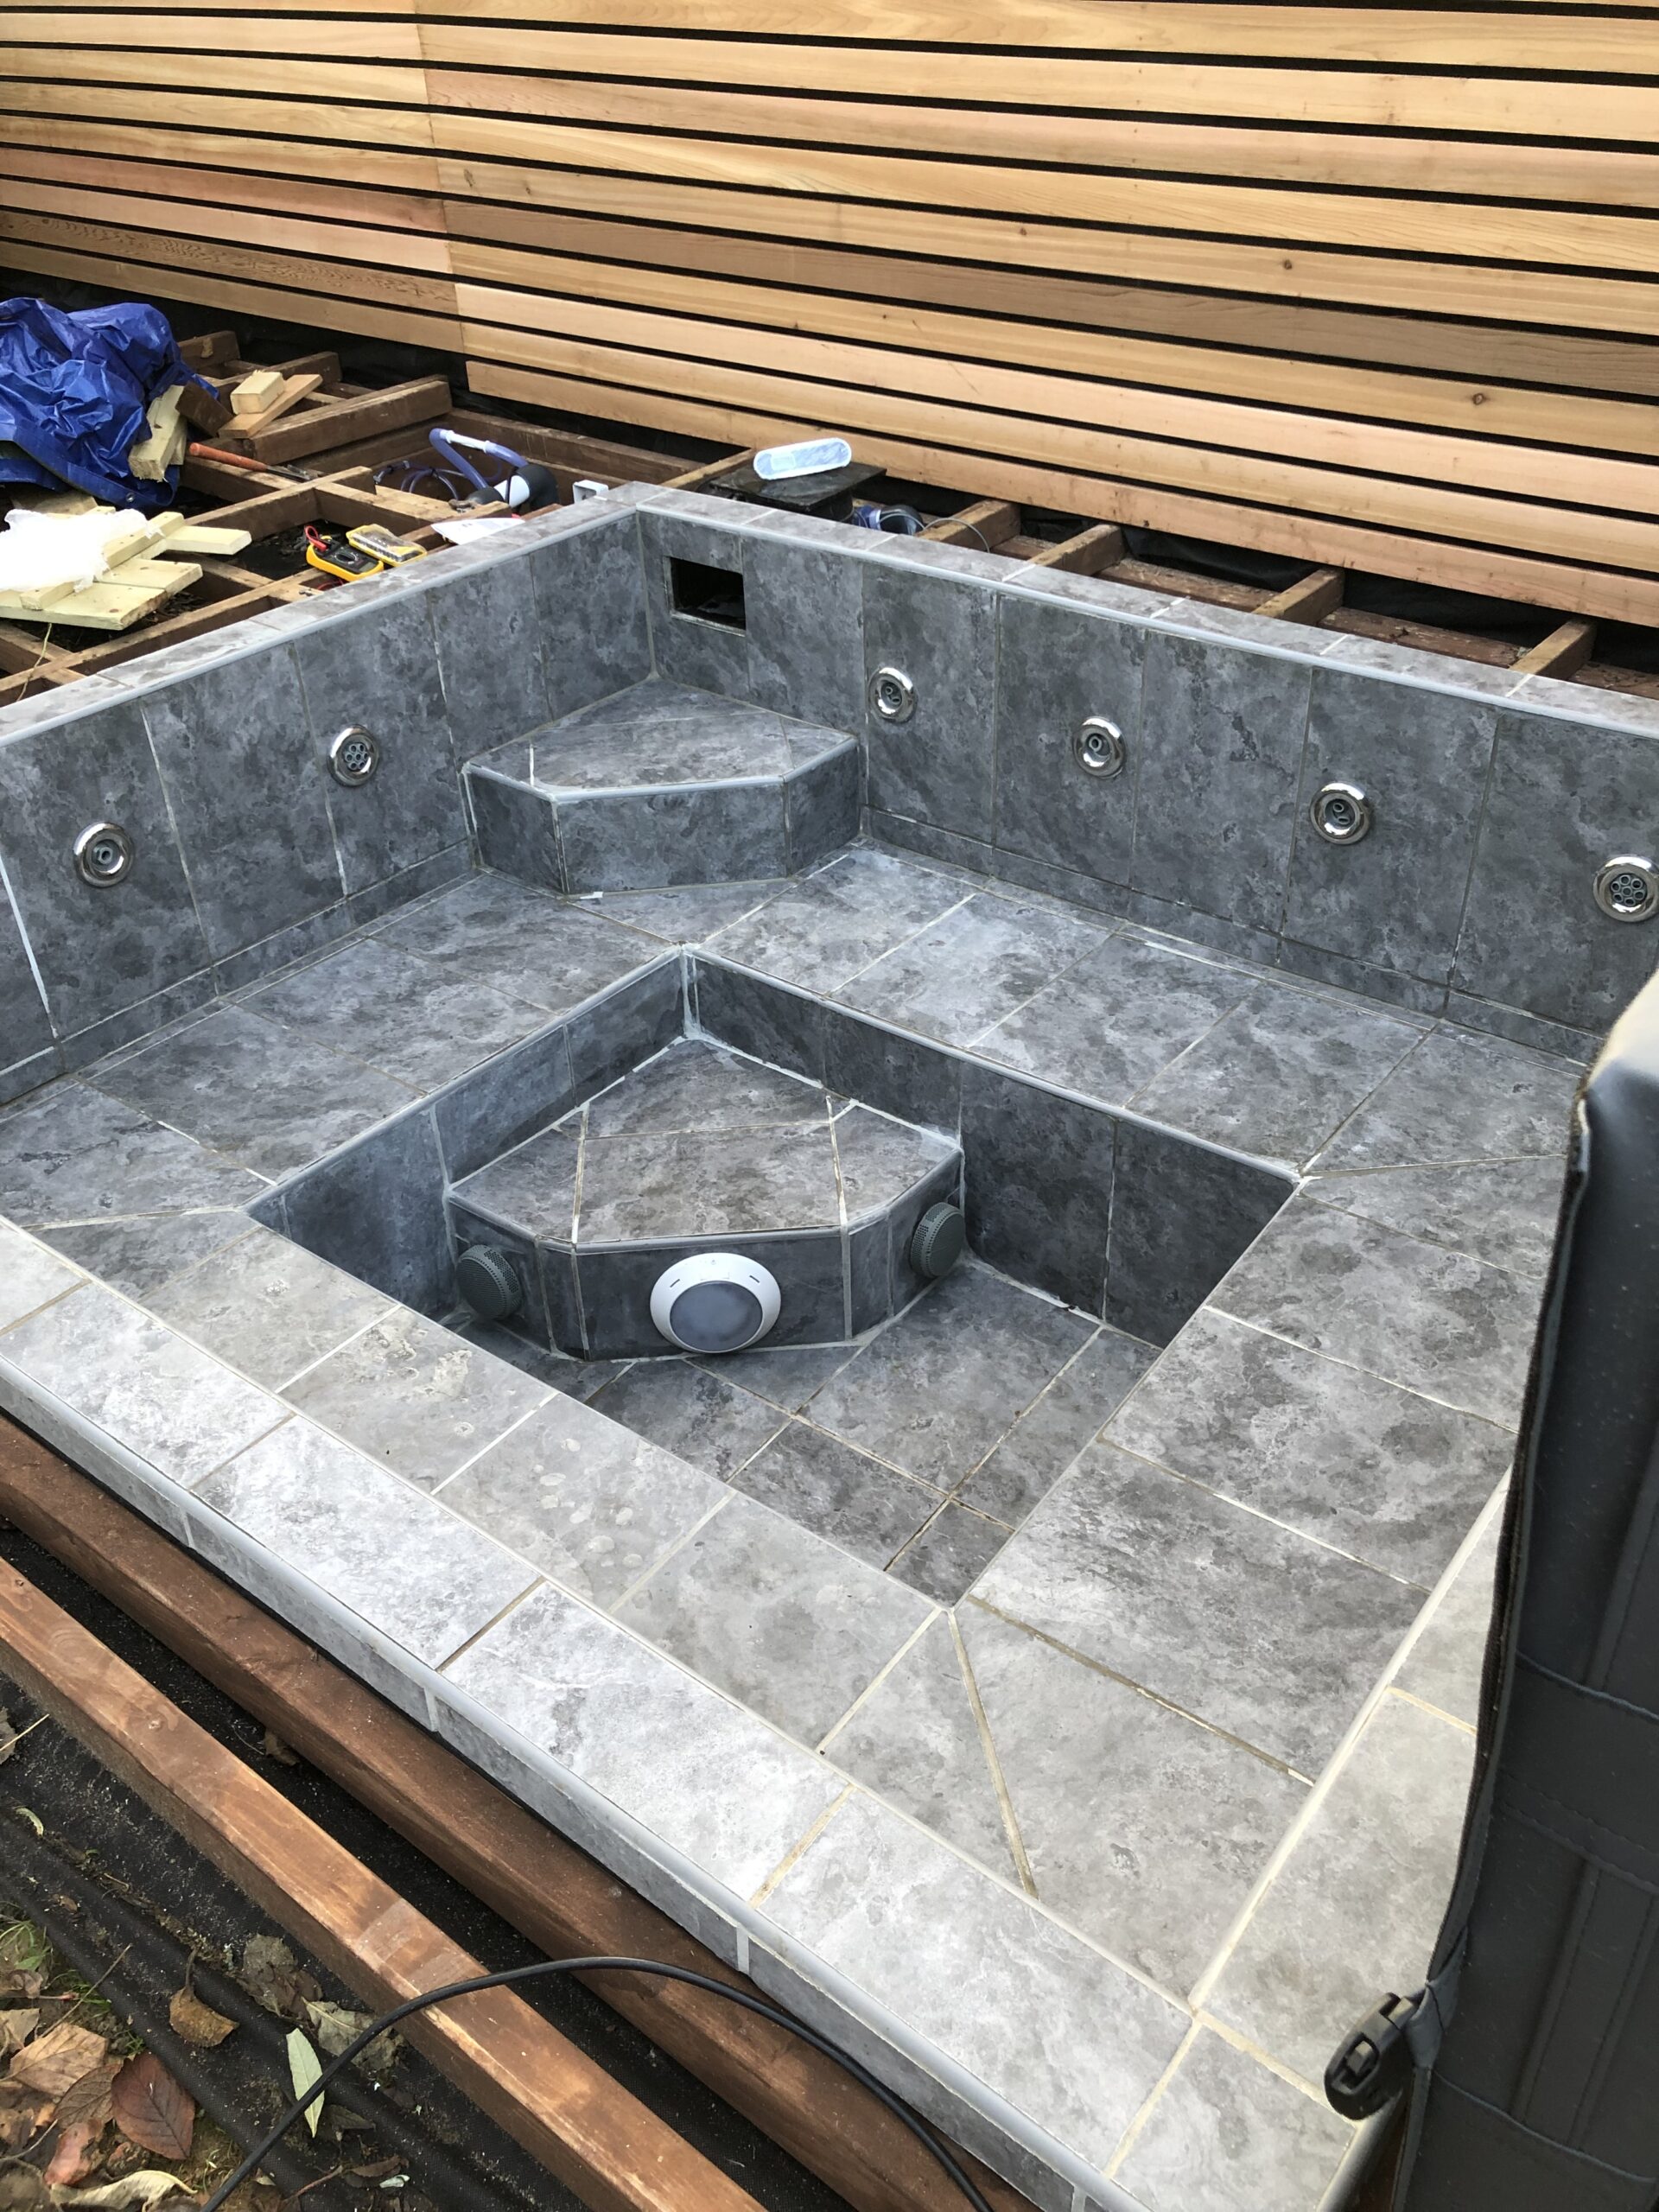 Planning, Planning and more Planning - The essentials for Building your Own DIY Hot Tub - Build ...